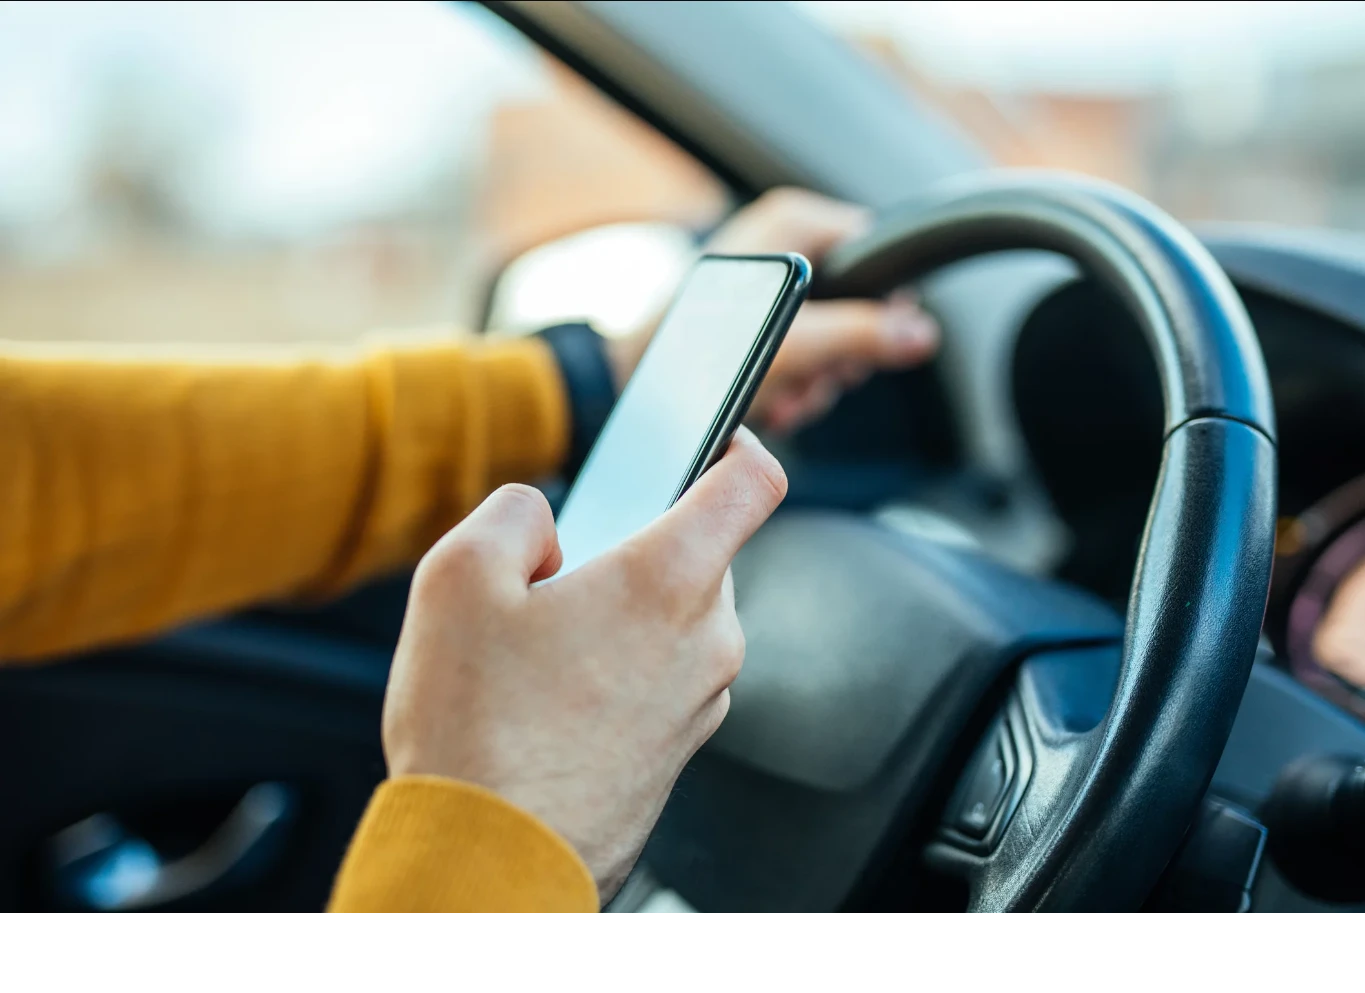 Don't Let a Distracted Driver Ruin Your Life: Hire an Accident Lawyer Now